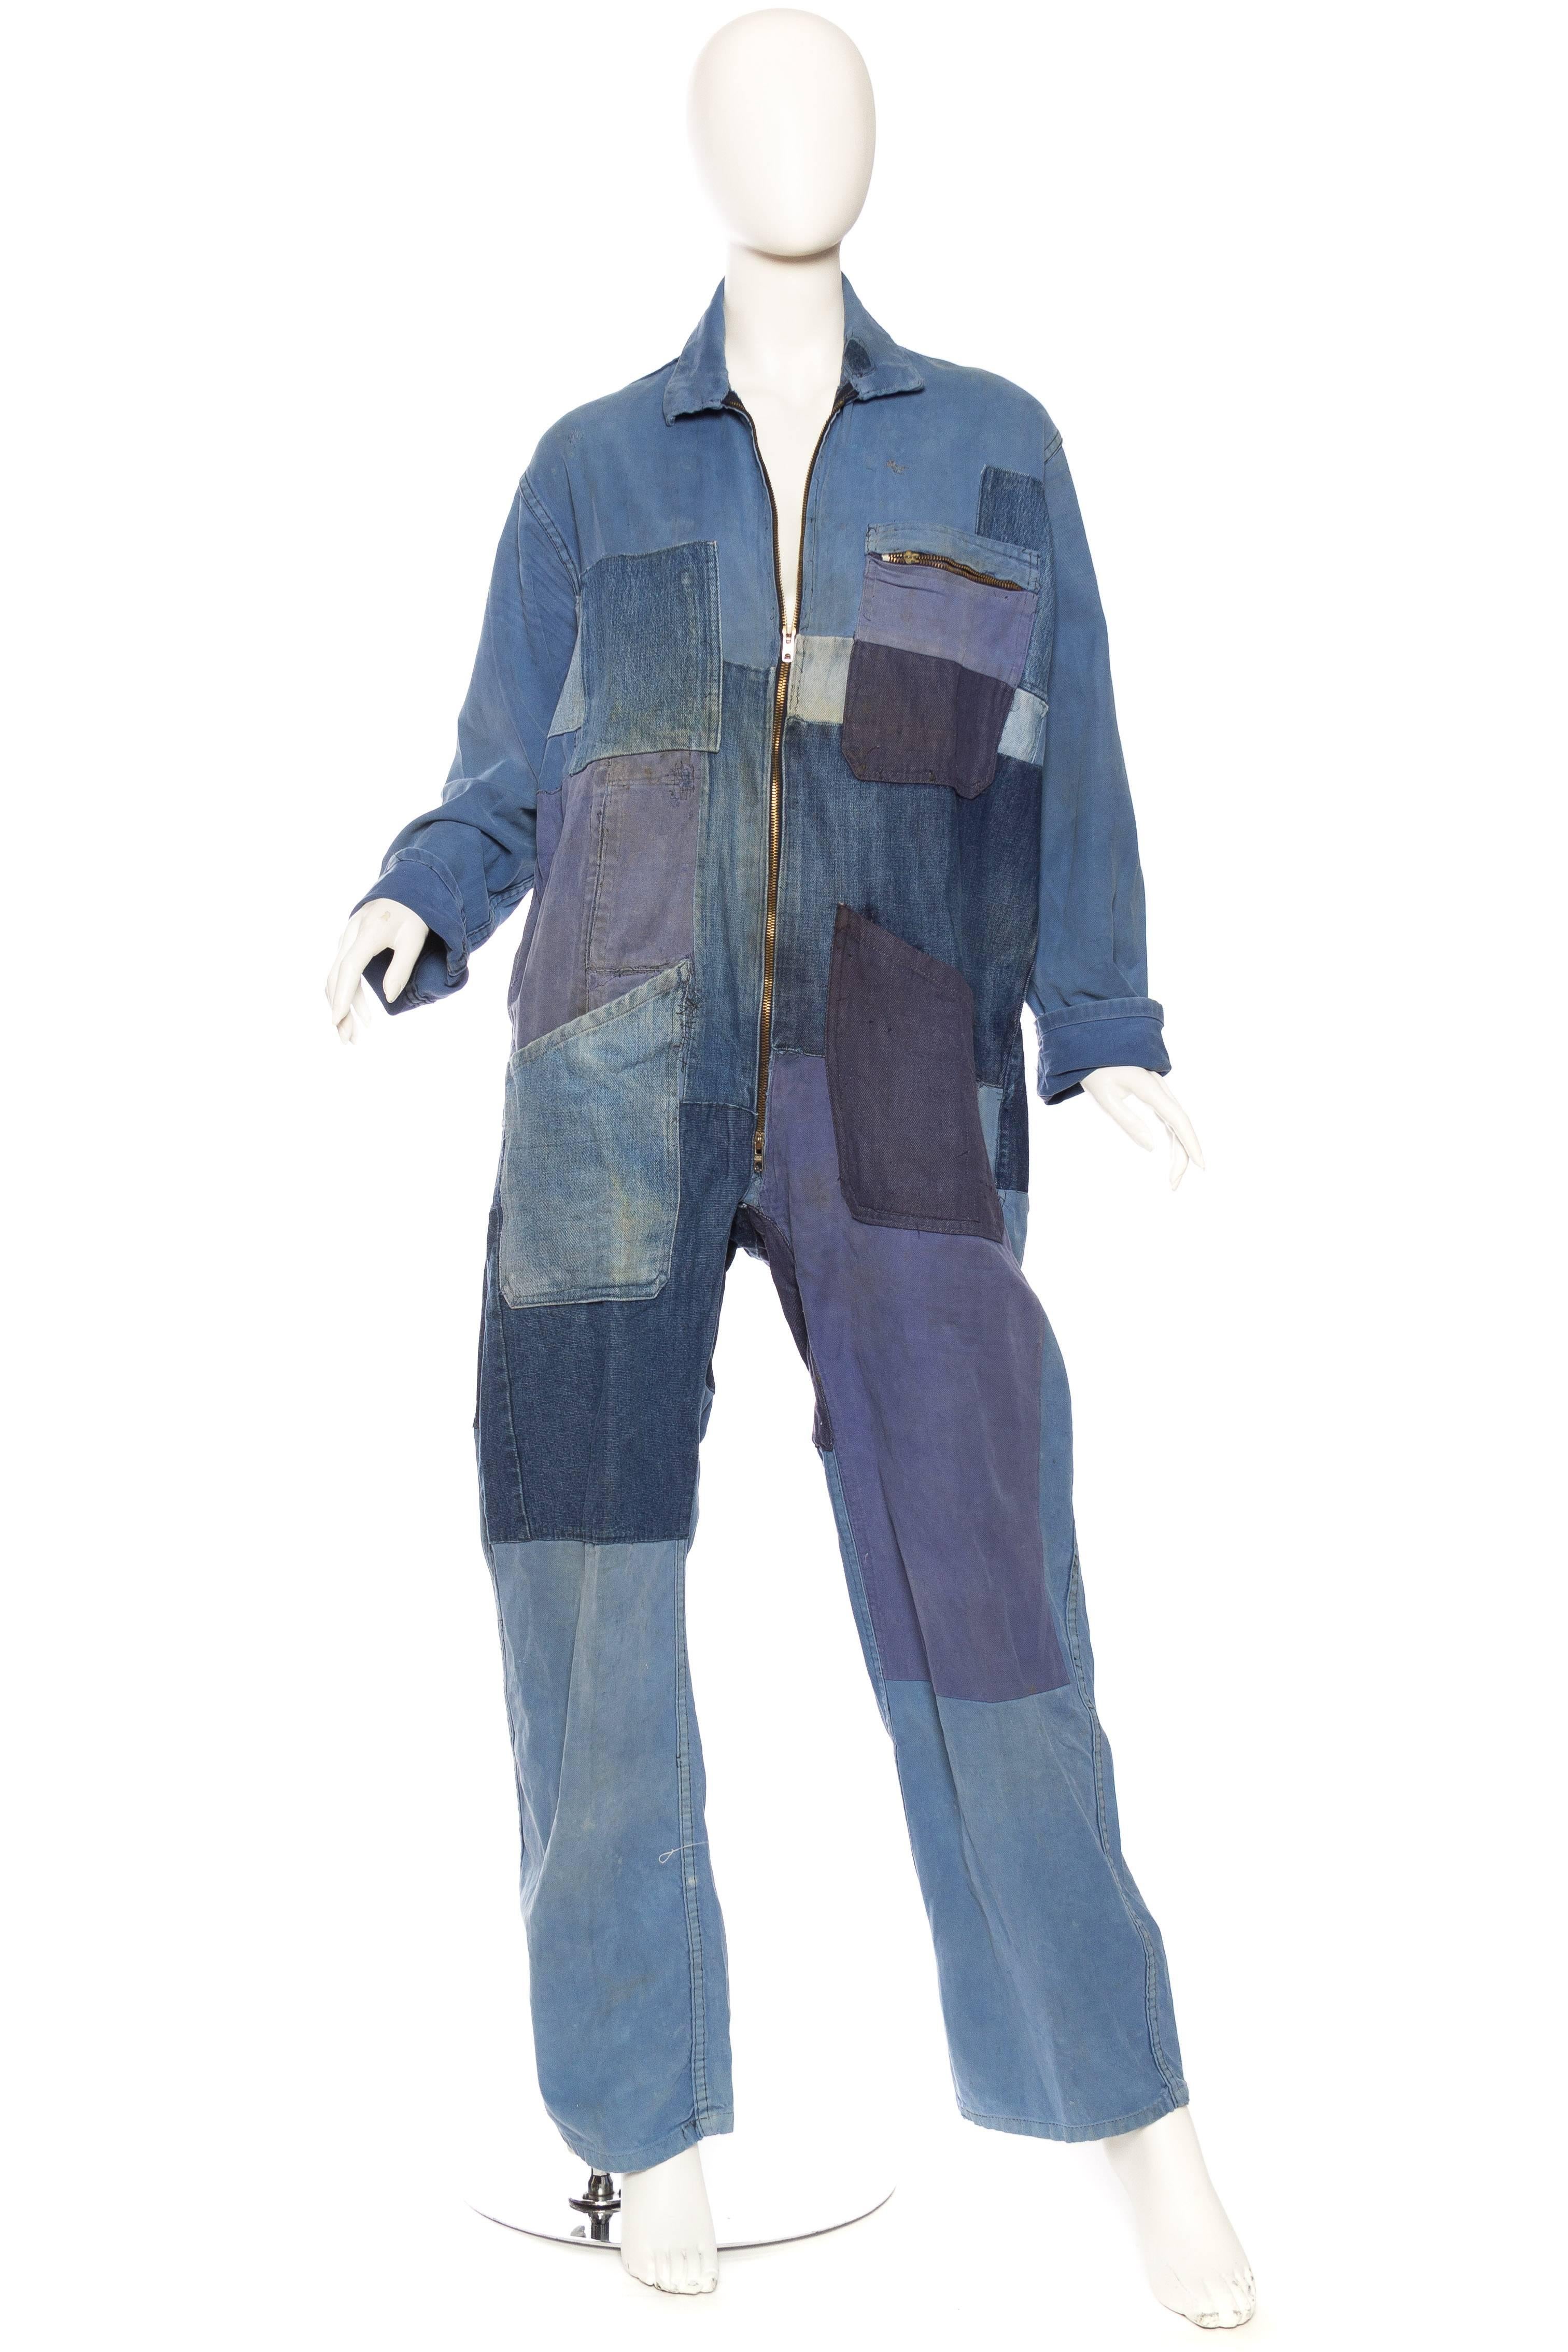 Dating from the 1930s to the 1960s this is the coolest mechanic's coveralls we have evver seen. Picked up in Paris they will surely become a wardrobe favorite. 